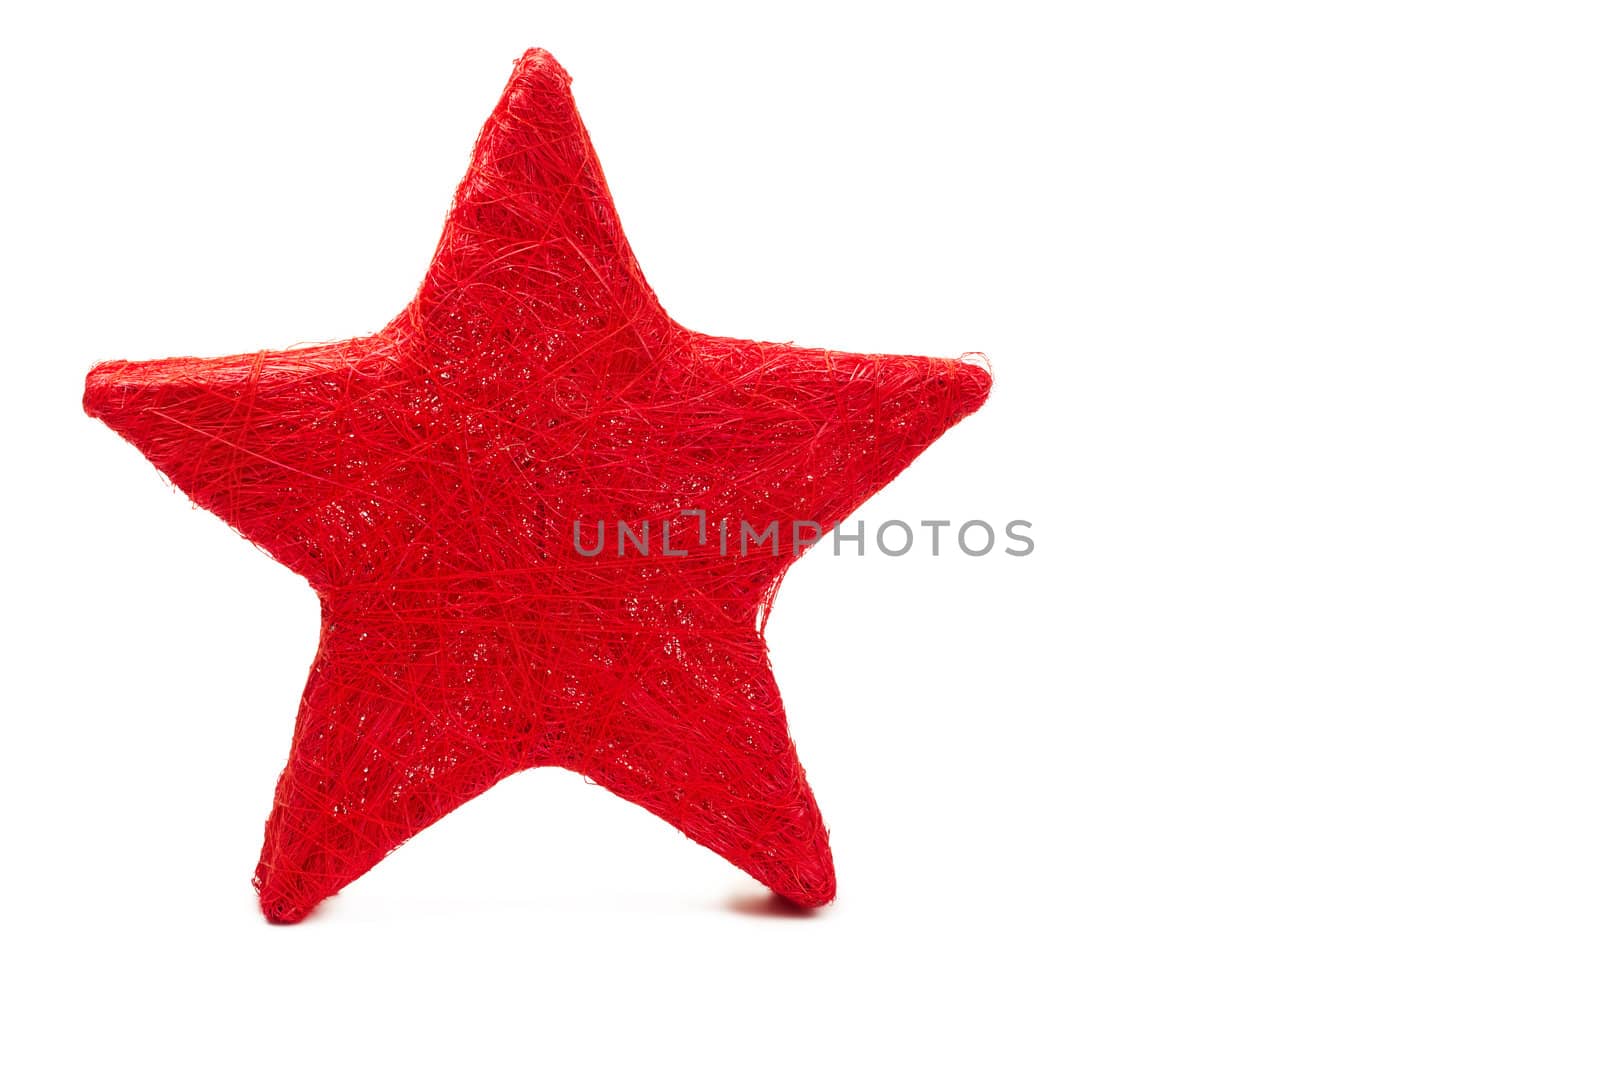 one red thread made star on white background